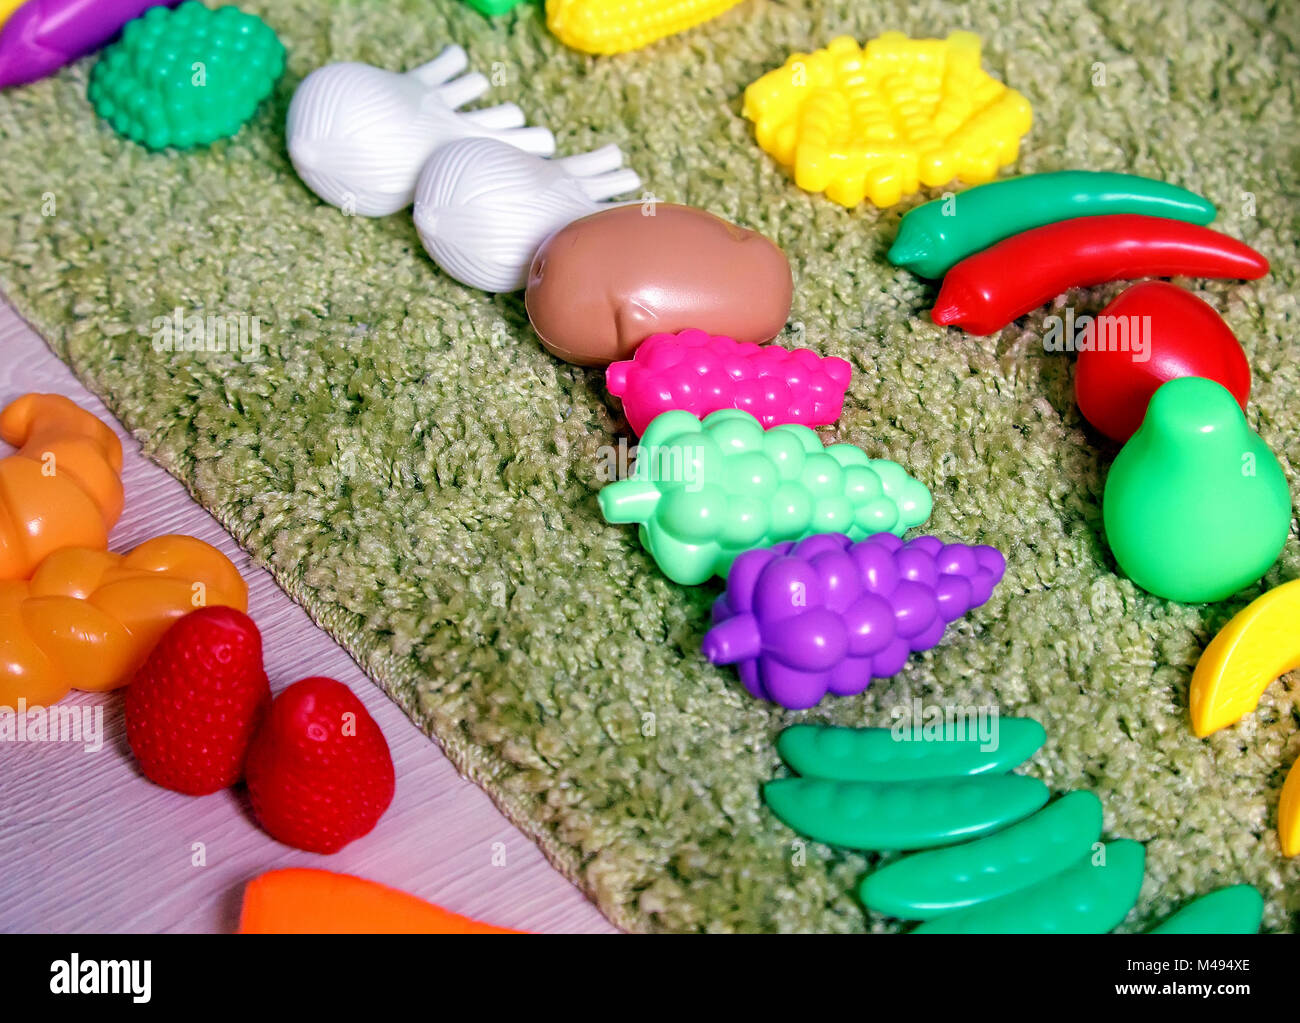 Plastic children's toys in the form of vegetables and fruits Stock Photo -  Alamy